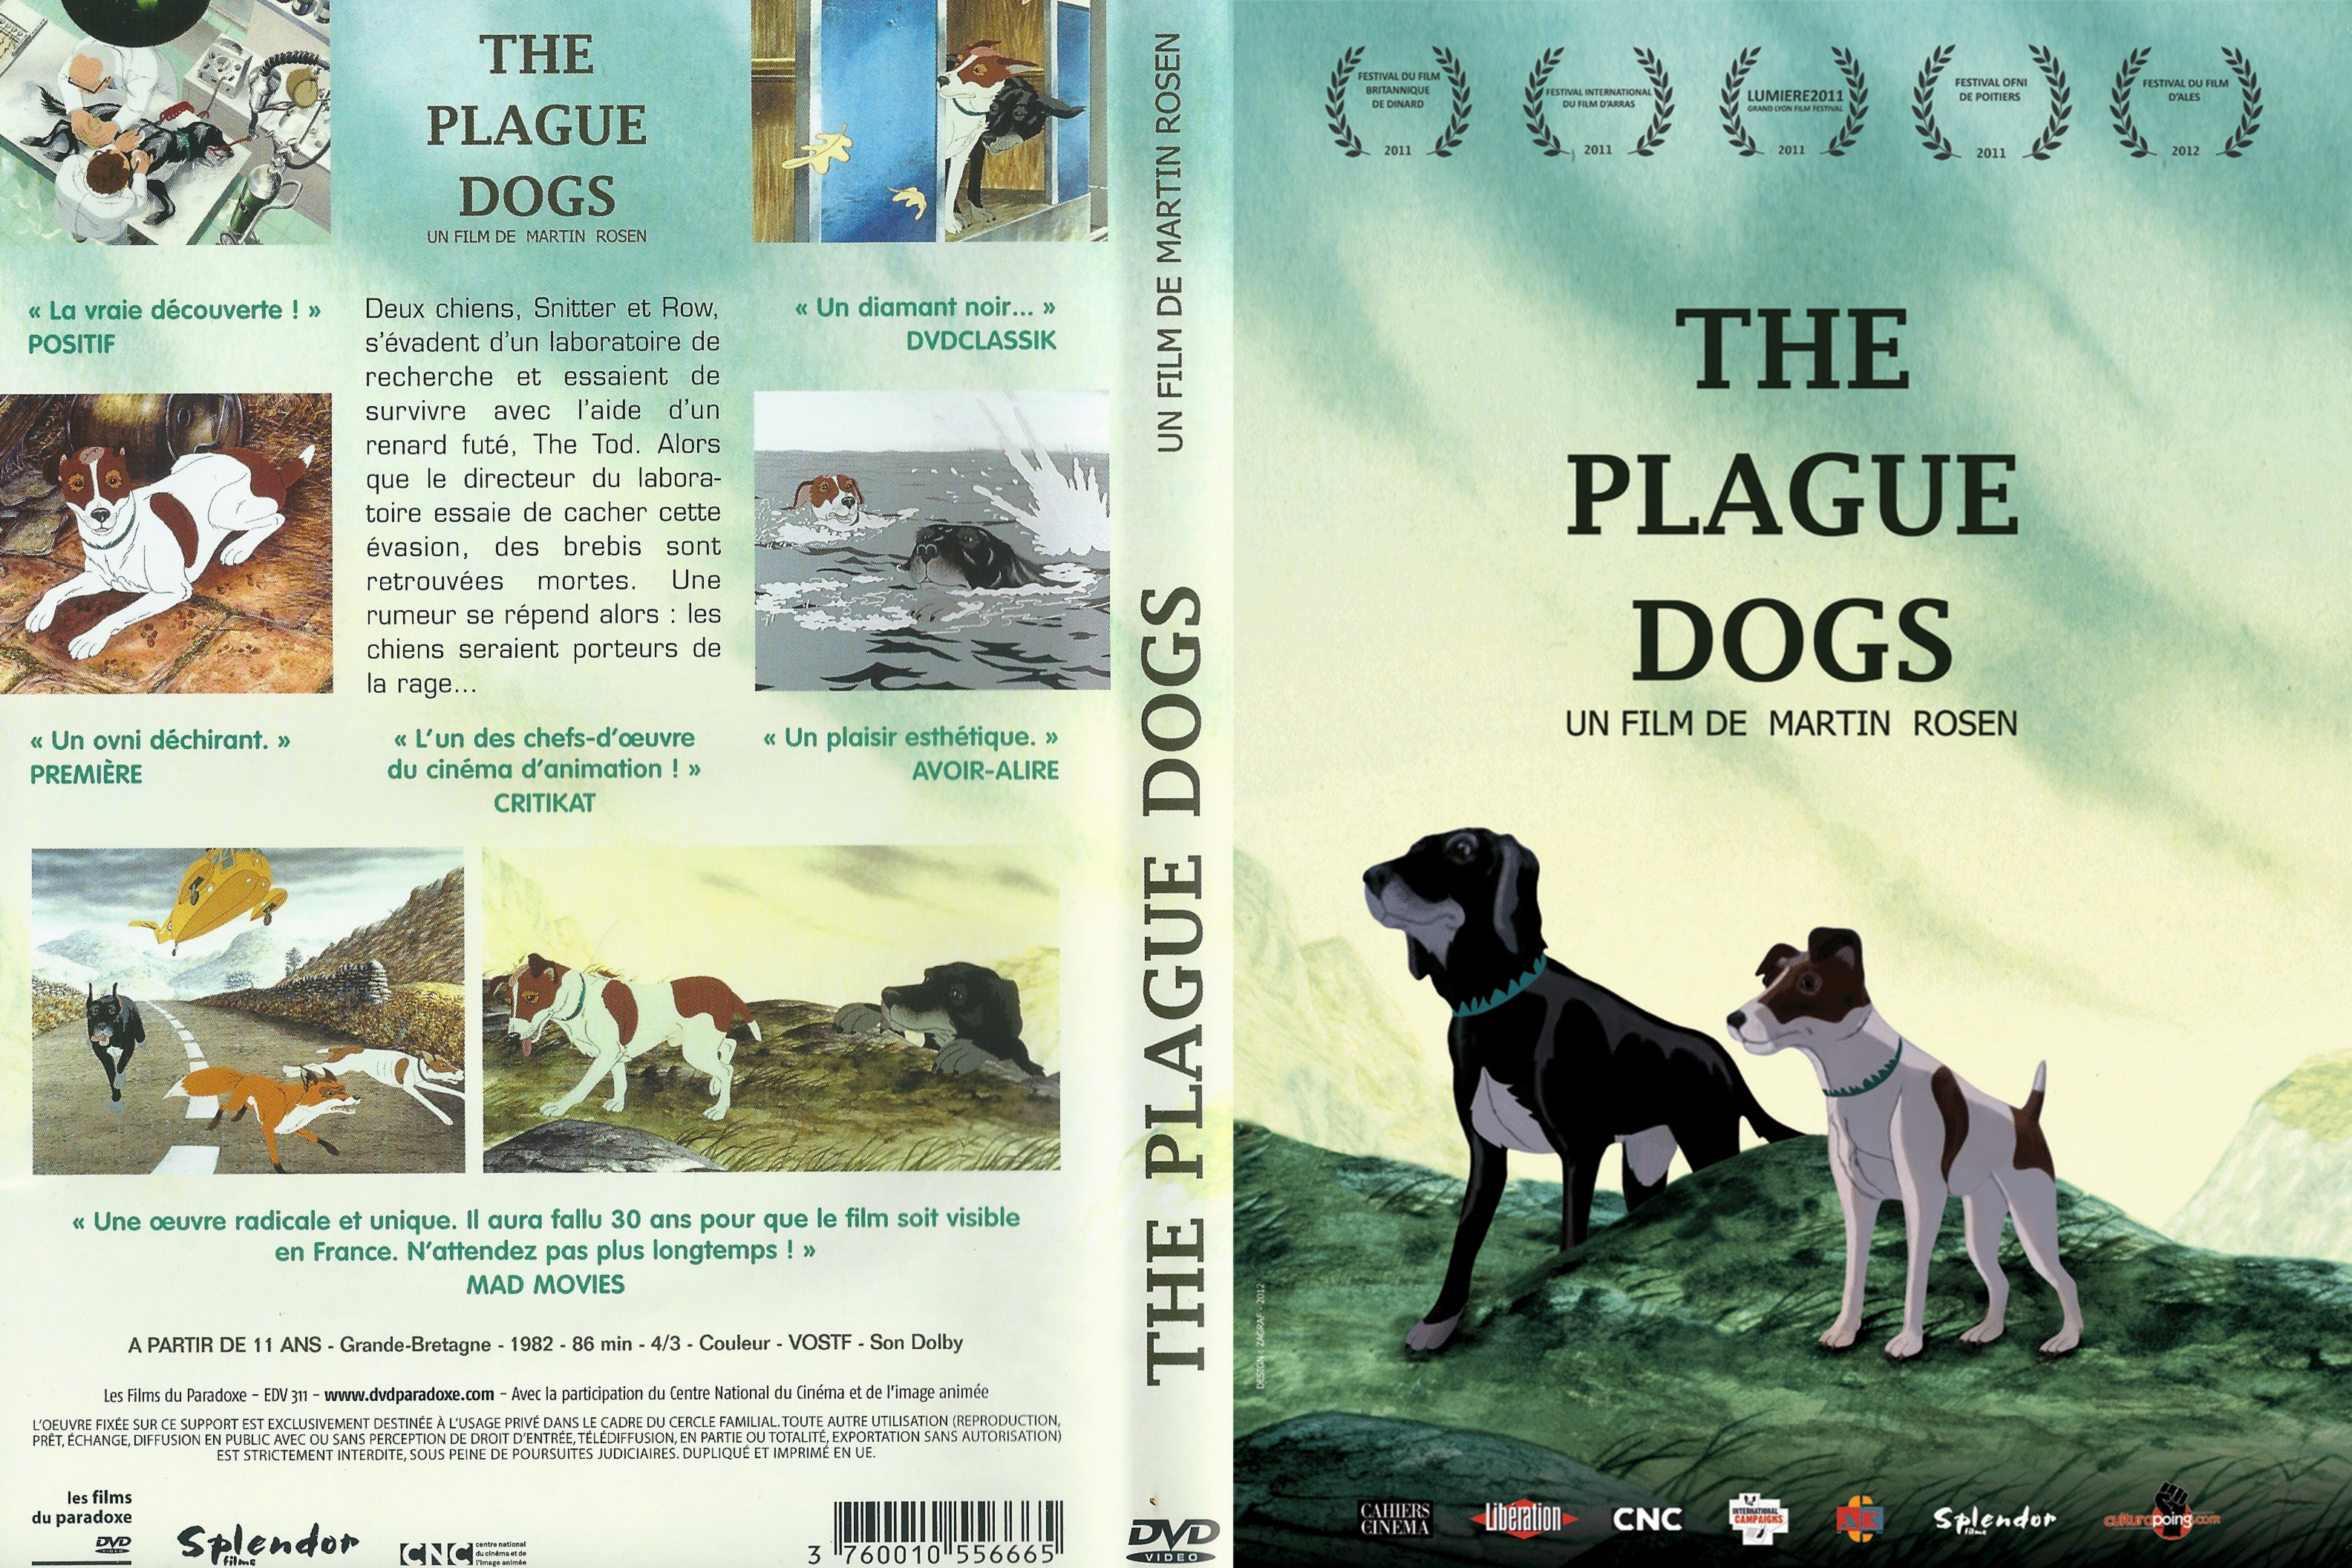 Jaquette DVD The plagues dogs